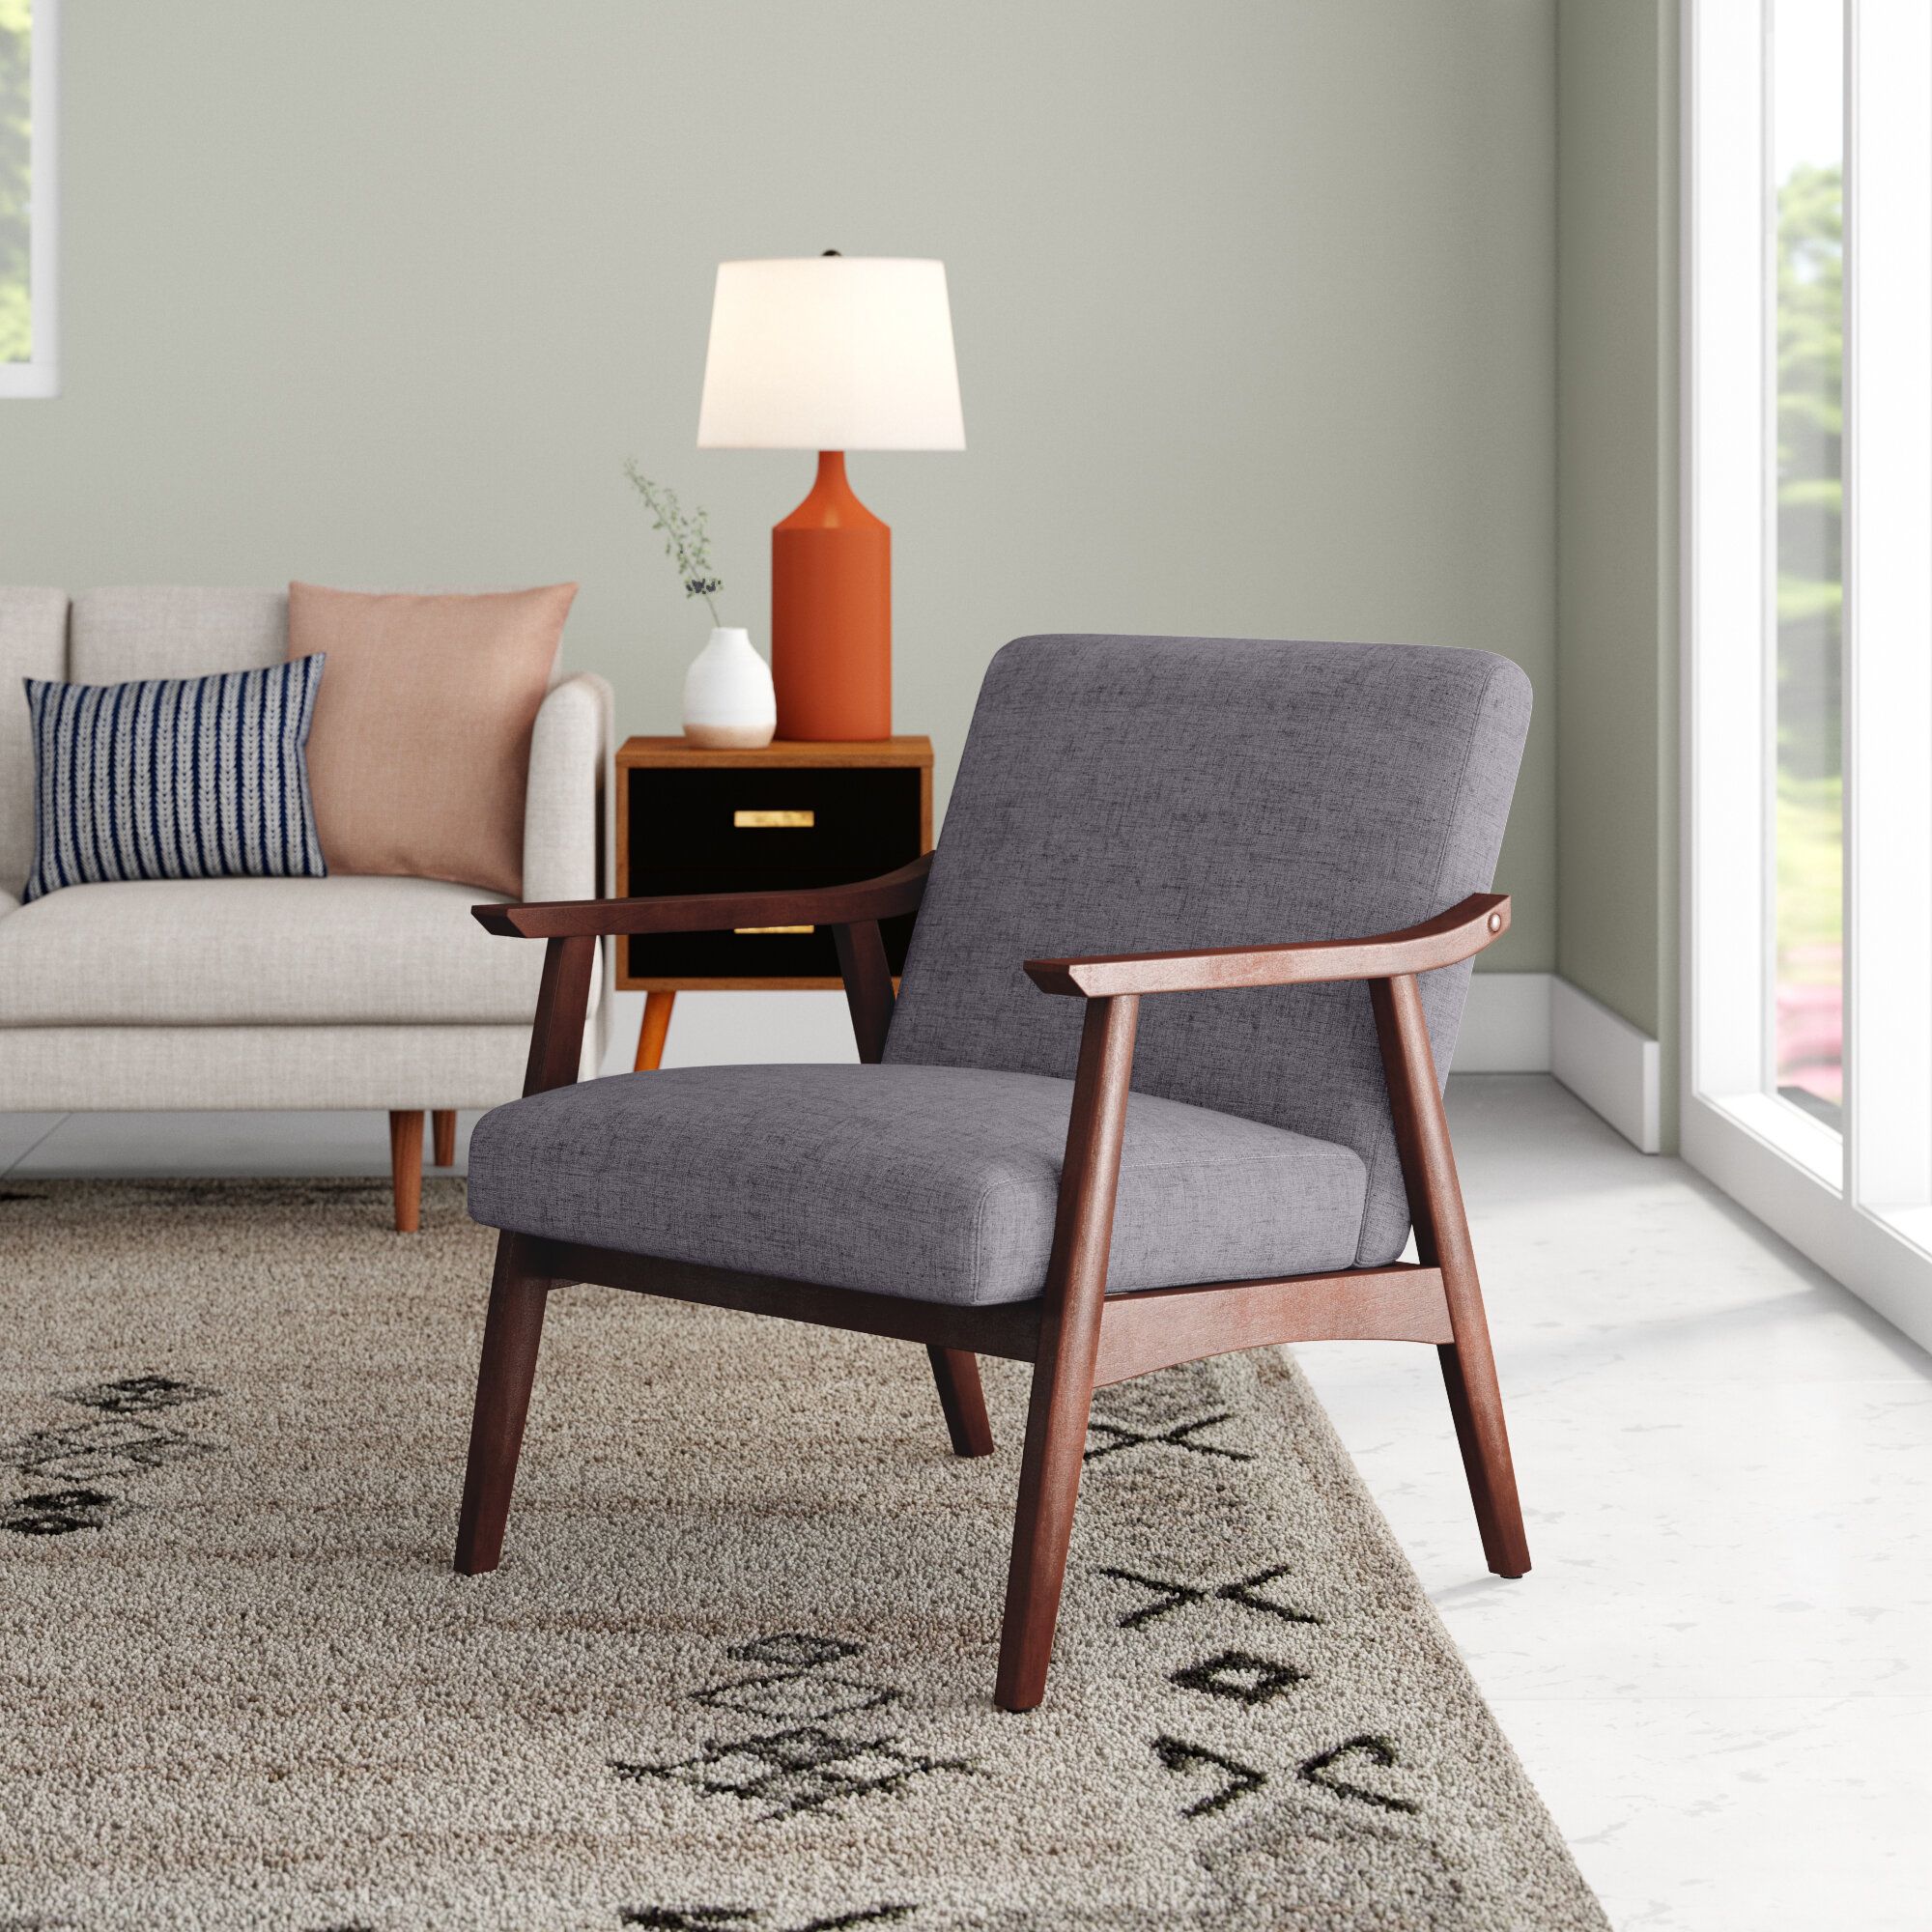 Armchairs | Wayfair In Suki Armchairs By Canora Grey (View 6 of 15)